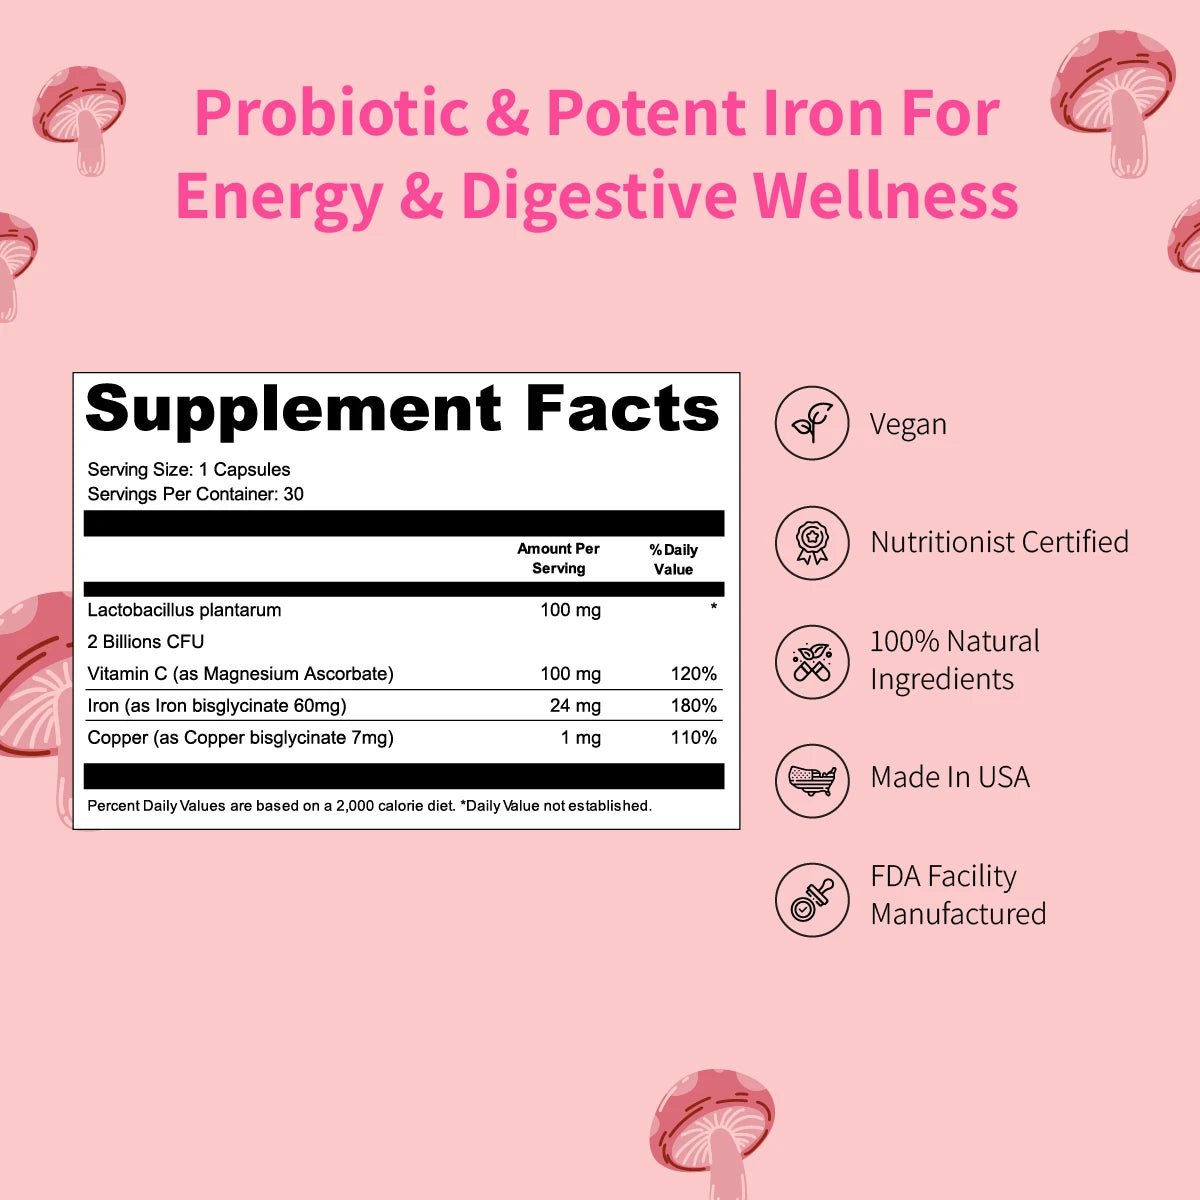 Nourished ProbIron - Probiotic + Potent Iron for Energy & Digestive Wellness - Nourished Natural Health